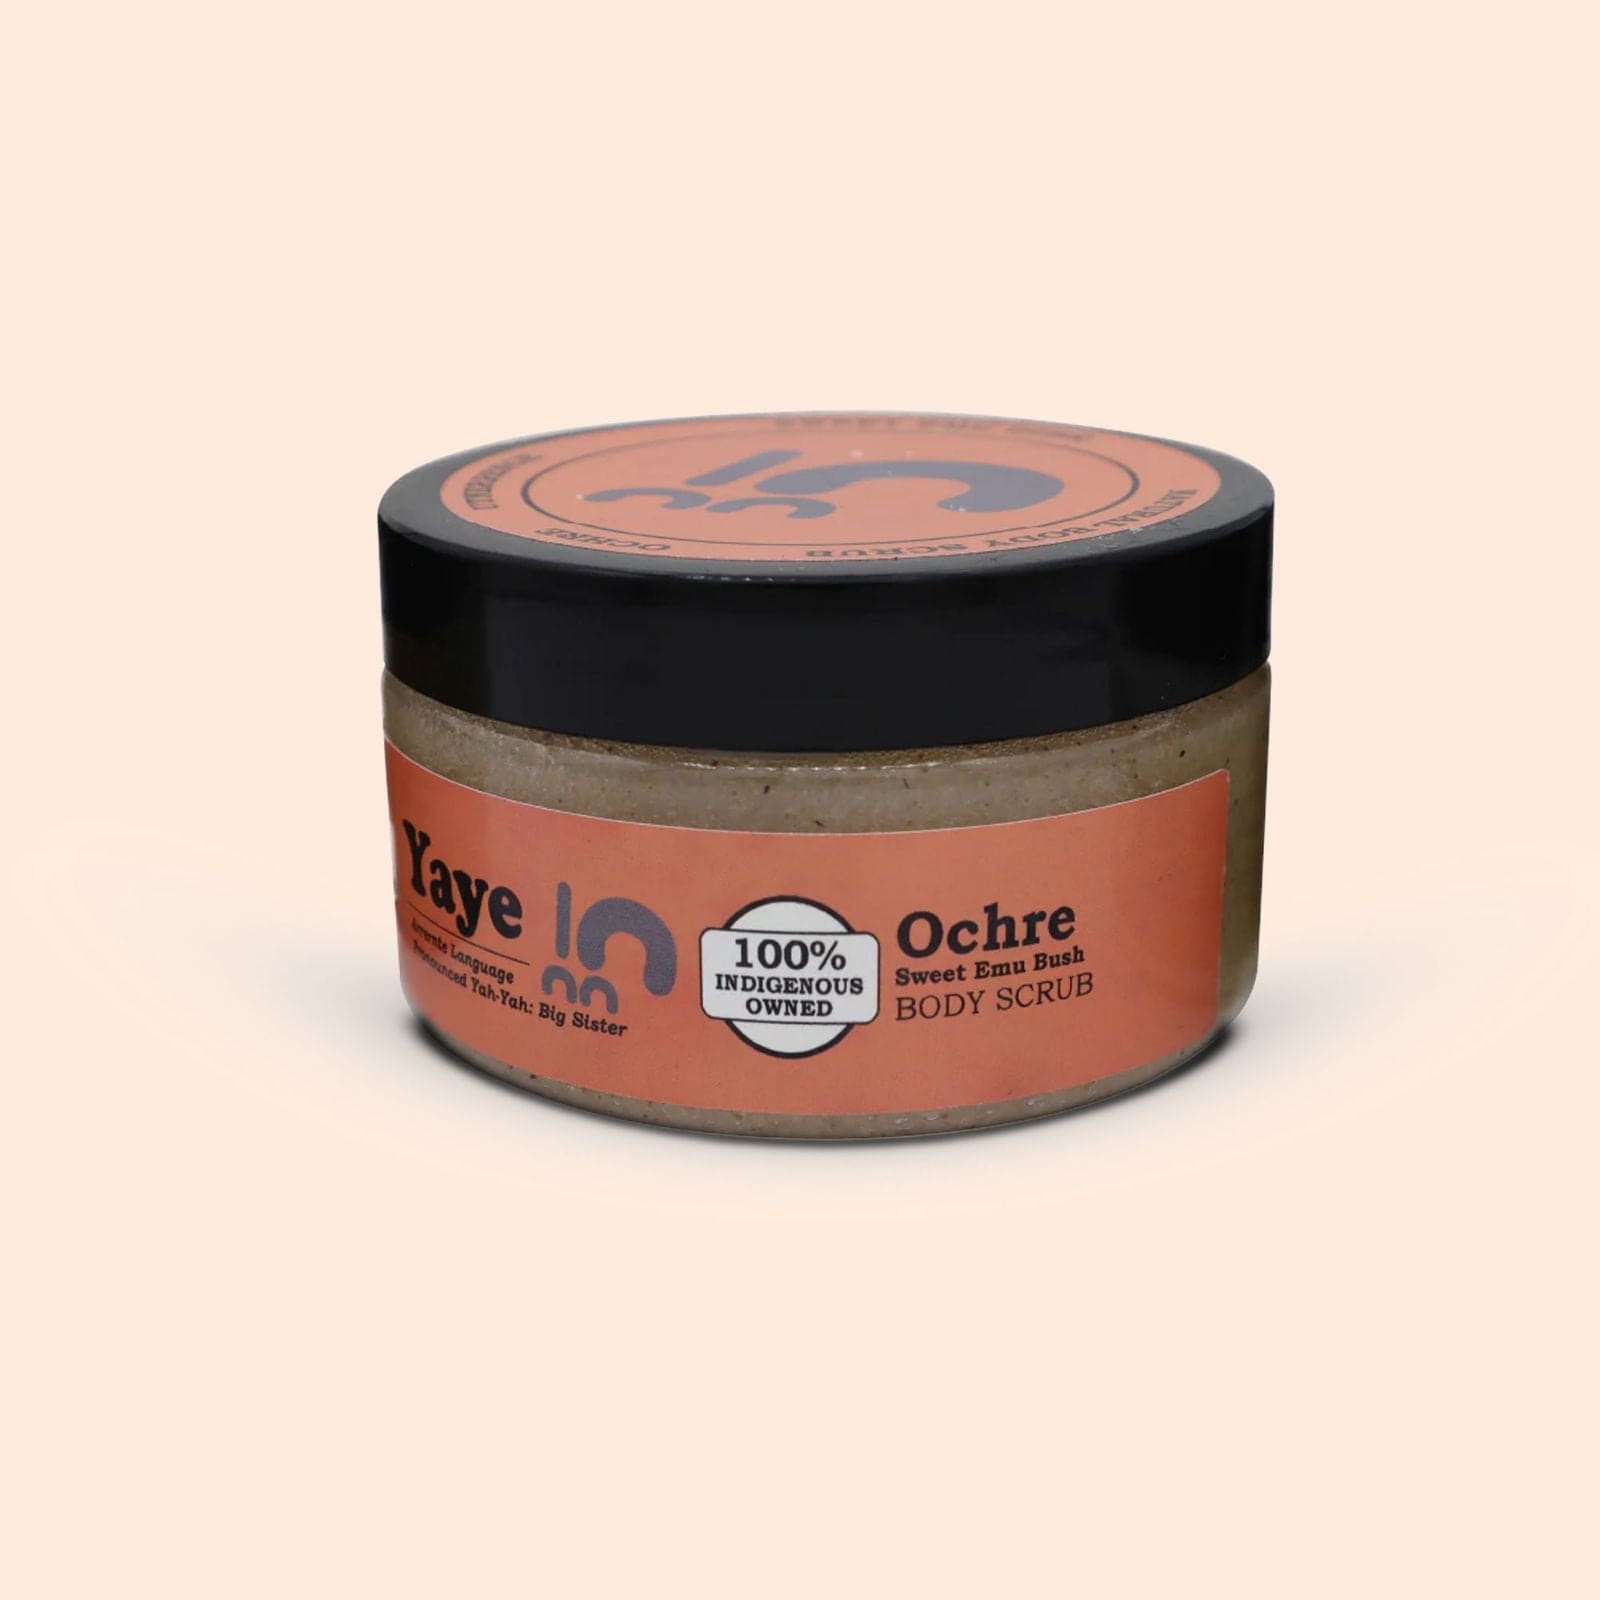 Best selling body scrub Australia. Aboriginal product in a jar. Native plant extracts. Aboriginal owned body scrub product.